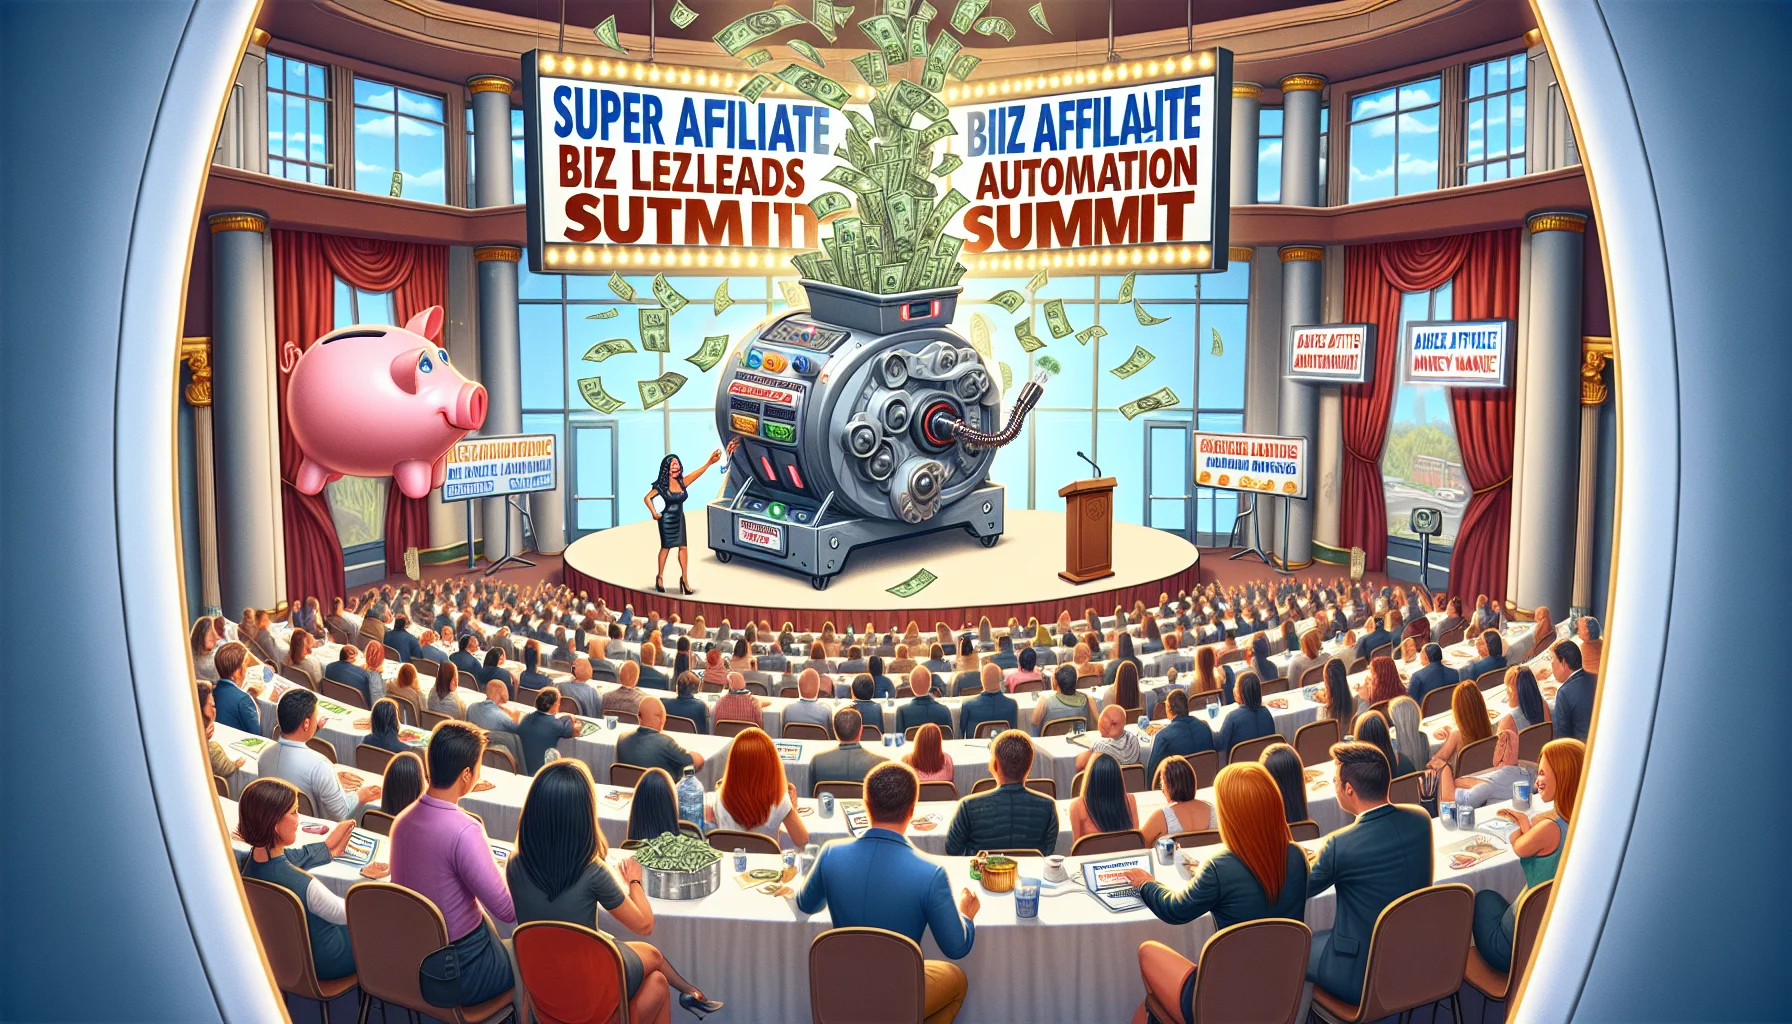 Create a humourous and realistic scene for a 'Super Affiliate Bizleads Automation Summit'. Picture a large conference room bustling with people of various descents and genders eagerly learning about online money making techniques. On stage, a dynamic female Hispanic speaker is presenting about affiliate marketing using a large, high-tech, automated machine that's whimsically shaped like a piggy bank. Dollar bills and coins are gently raining down from the ceiling creating a festive atmosphere. Banners and signboards around the room highlight the Summit's title, promising enticing opportunities for online wealth creation.